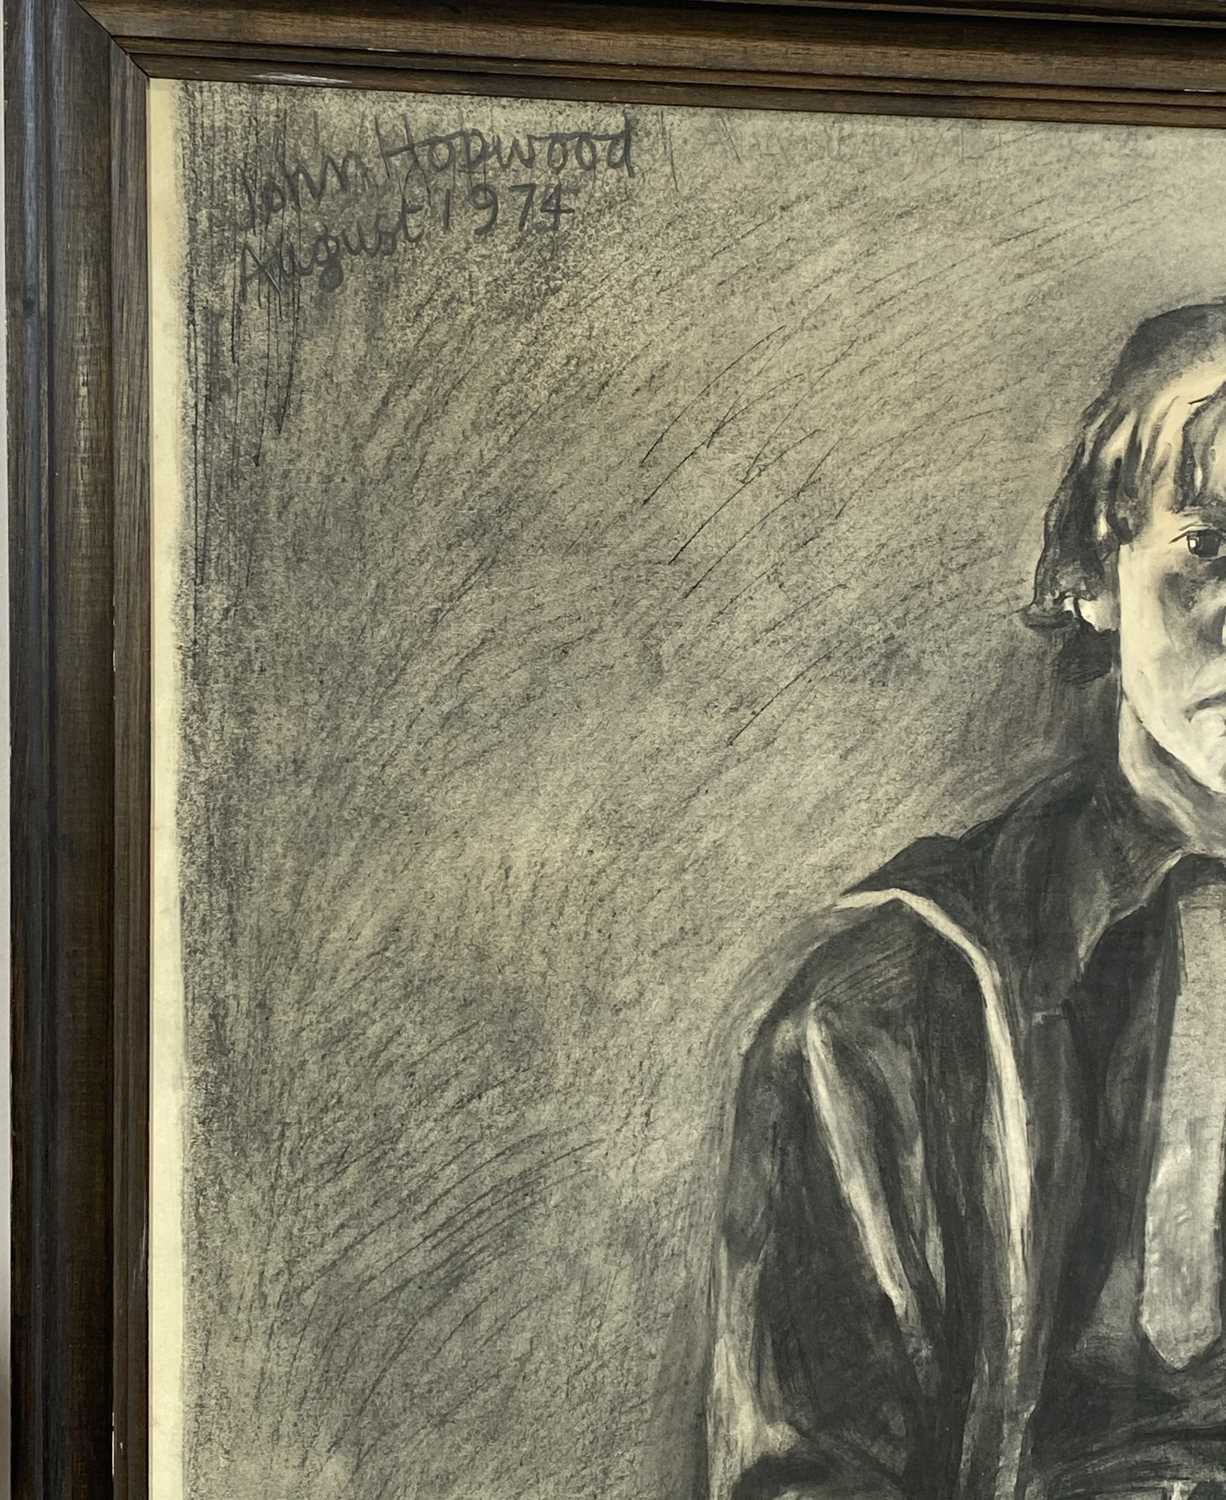 John HOPWOOD (1942-2015)Seated Boy JesseCharcoalSigned and dated August 1974151 x 98cm - Image 2 of 2